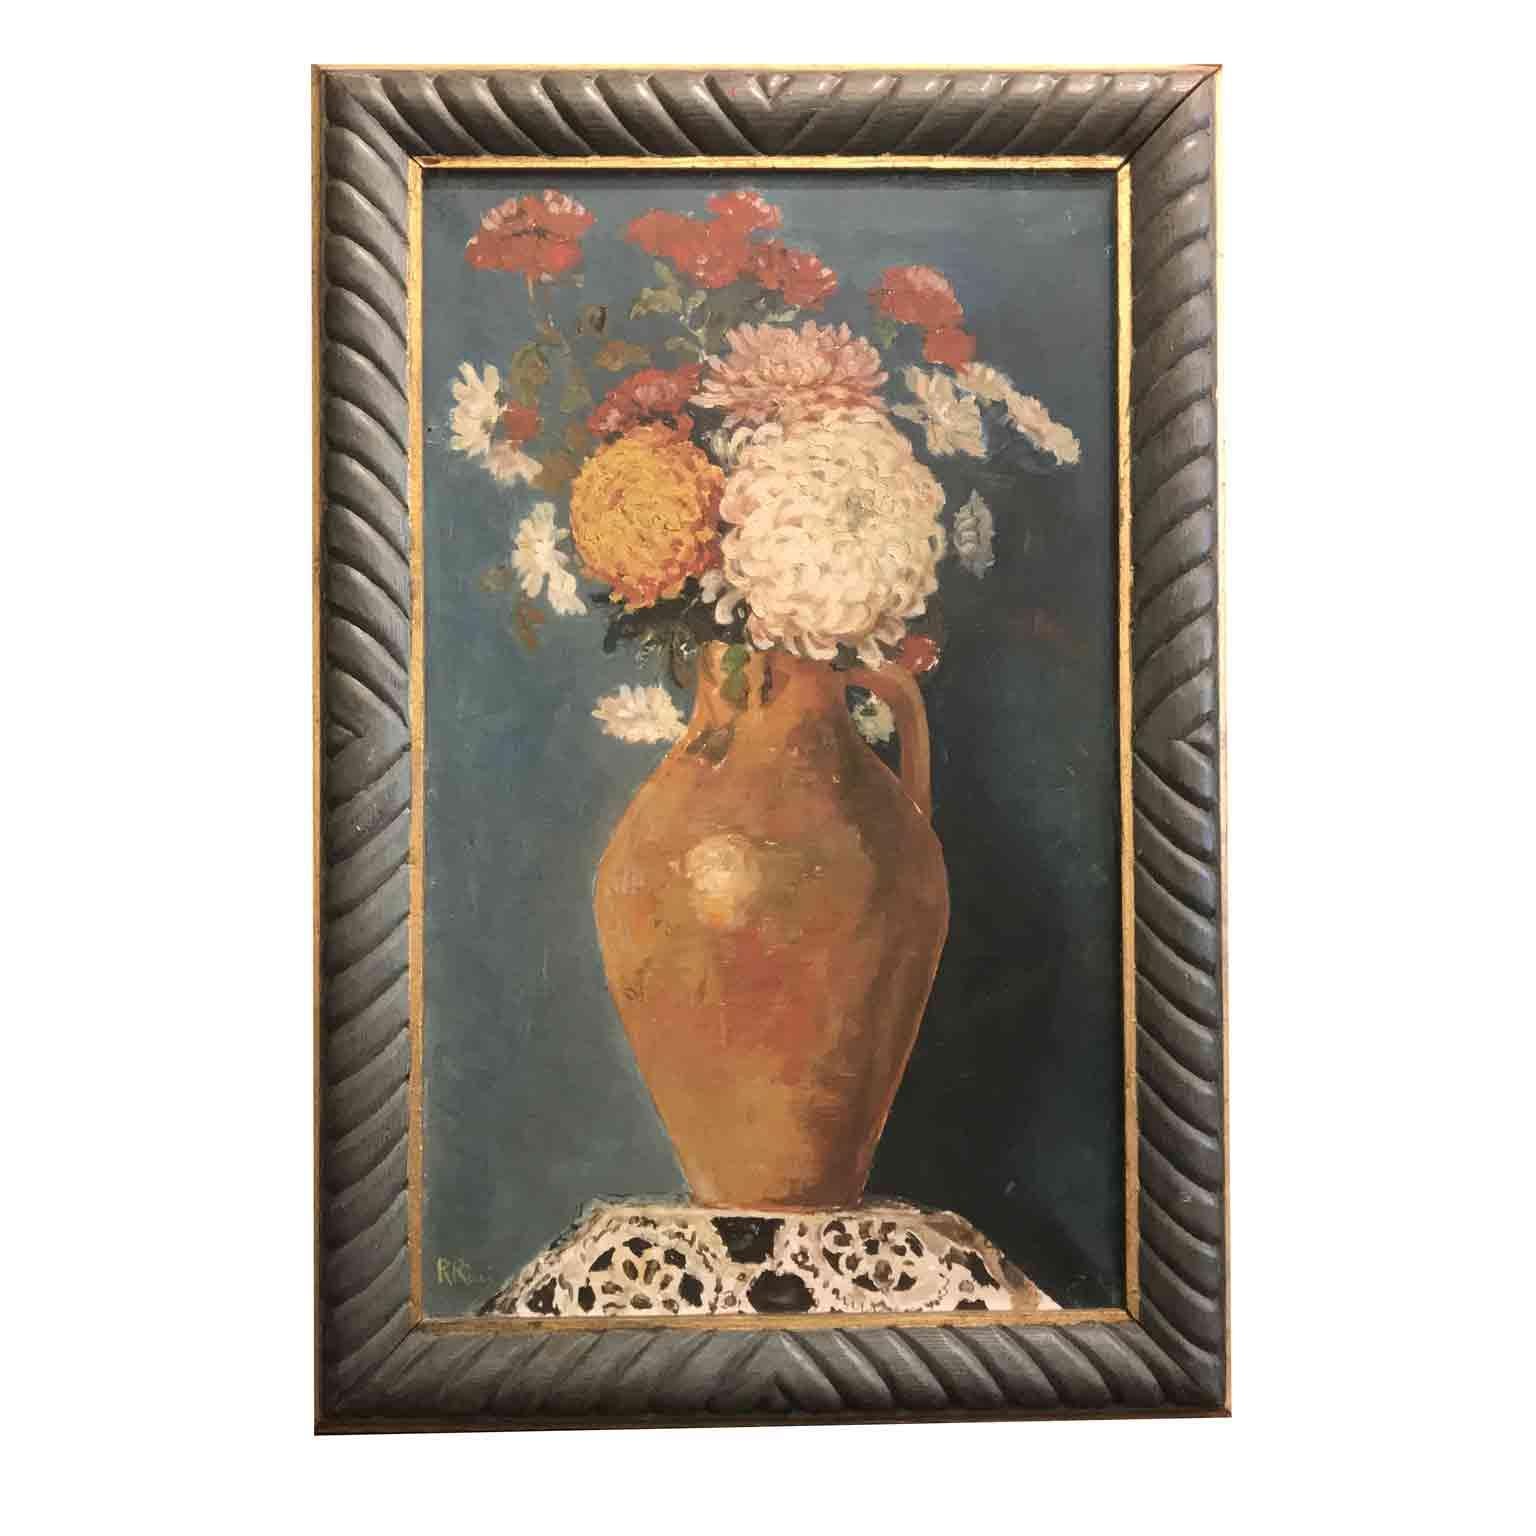 Pair of Italian Flower Still life Paintings by Ricci 20th Century Green Frames For Sale 2